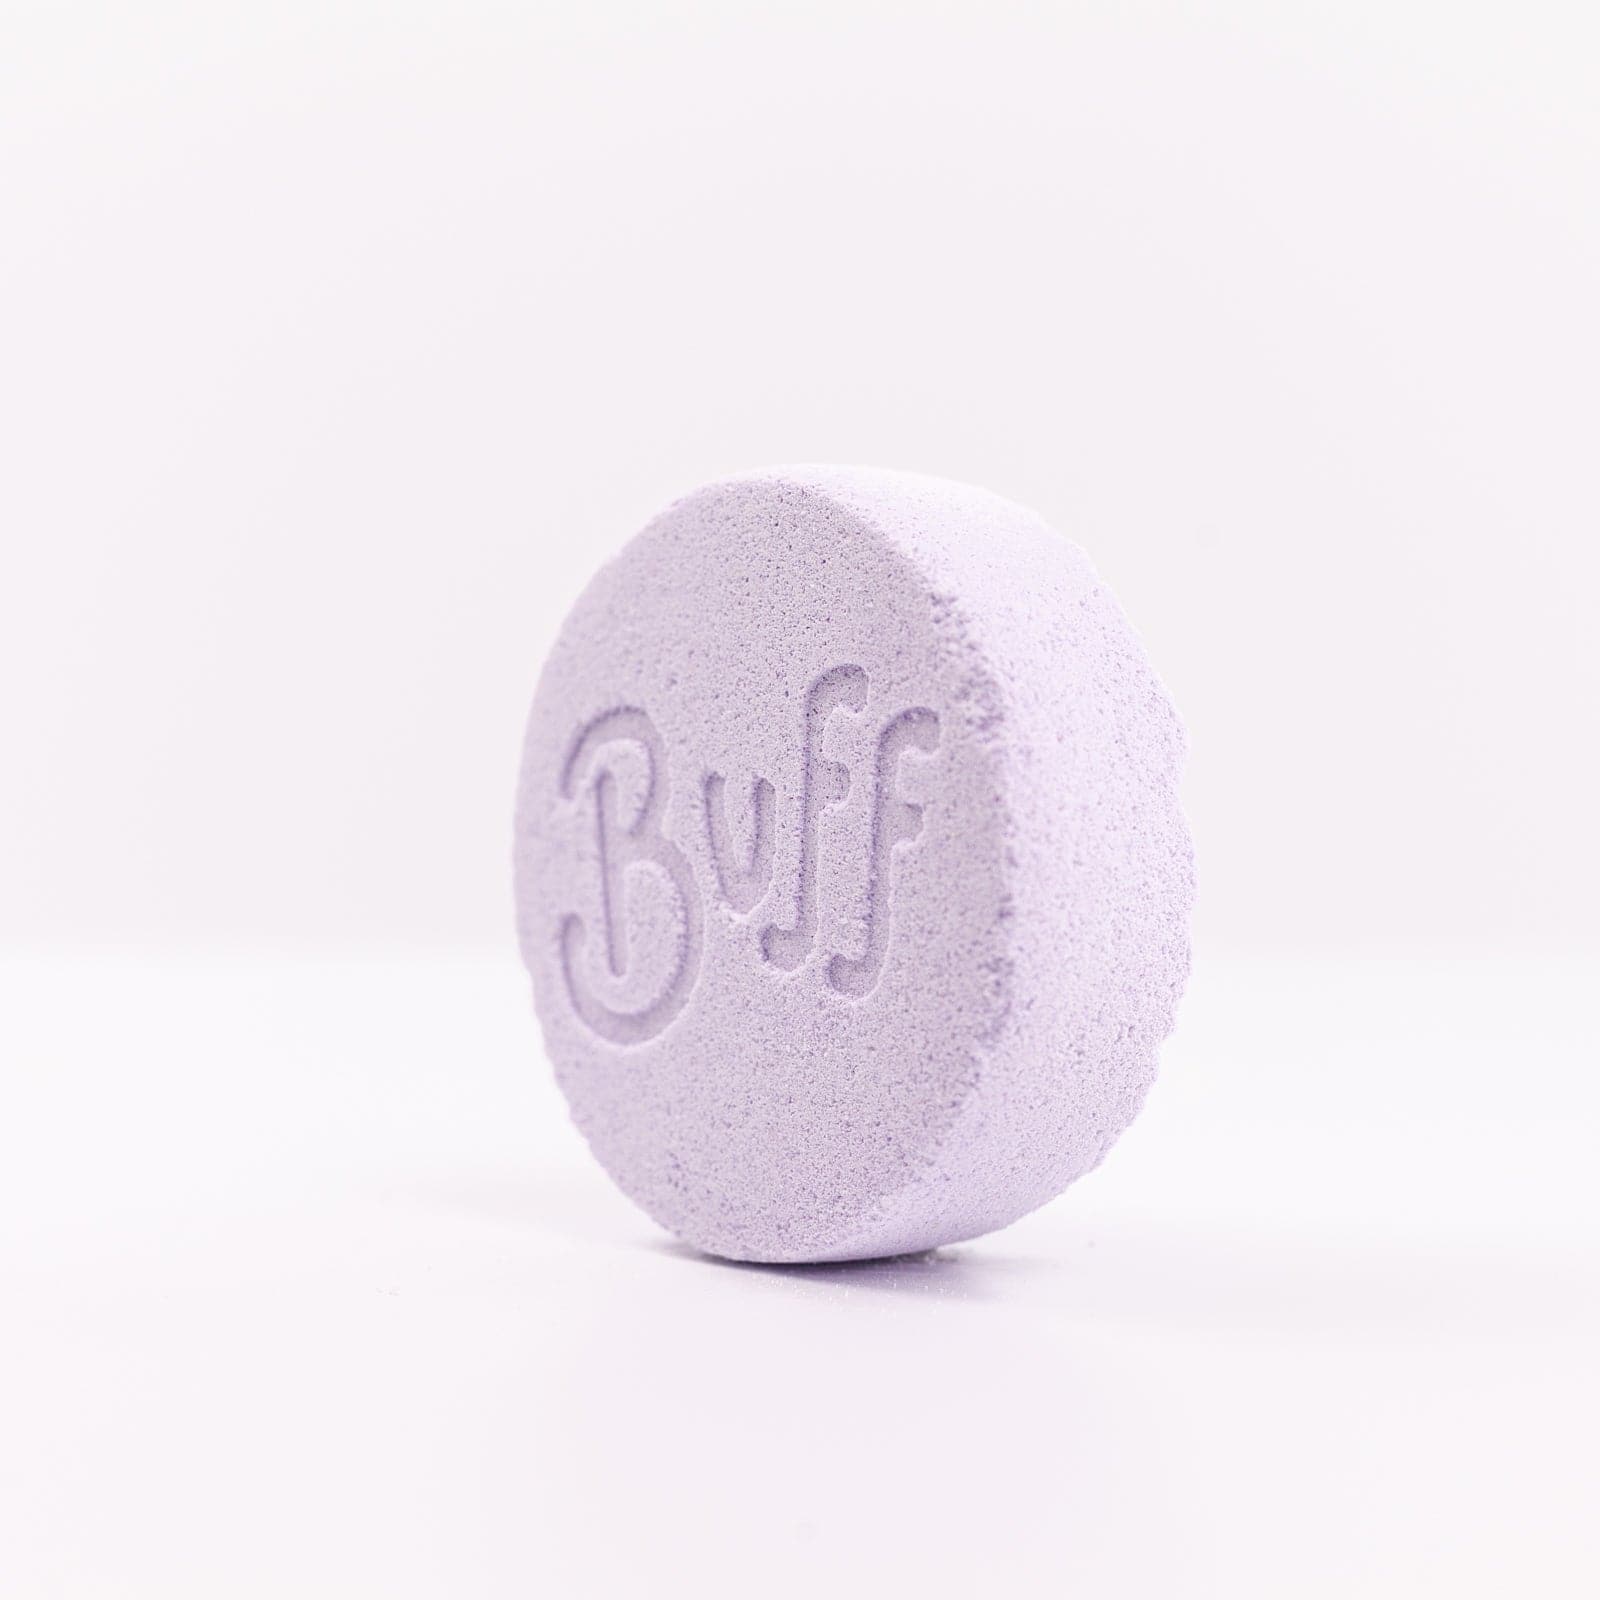 Buff City Soap's lavender colored and scented shower fizzy soap with buff written on its side